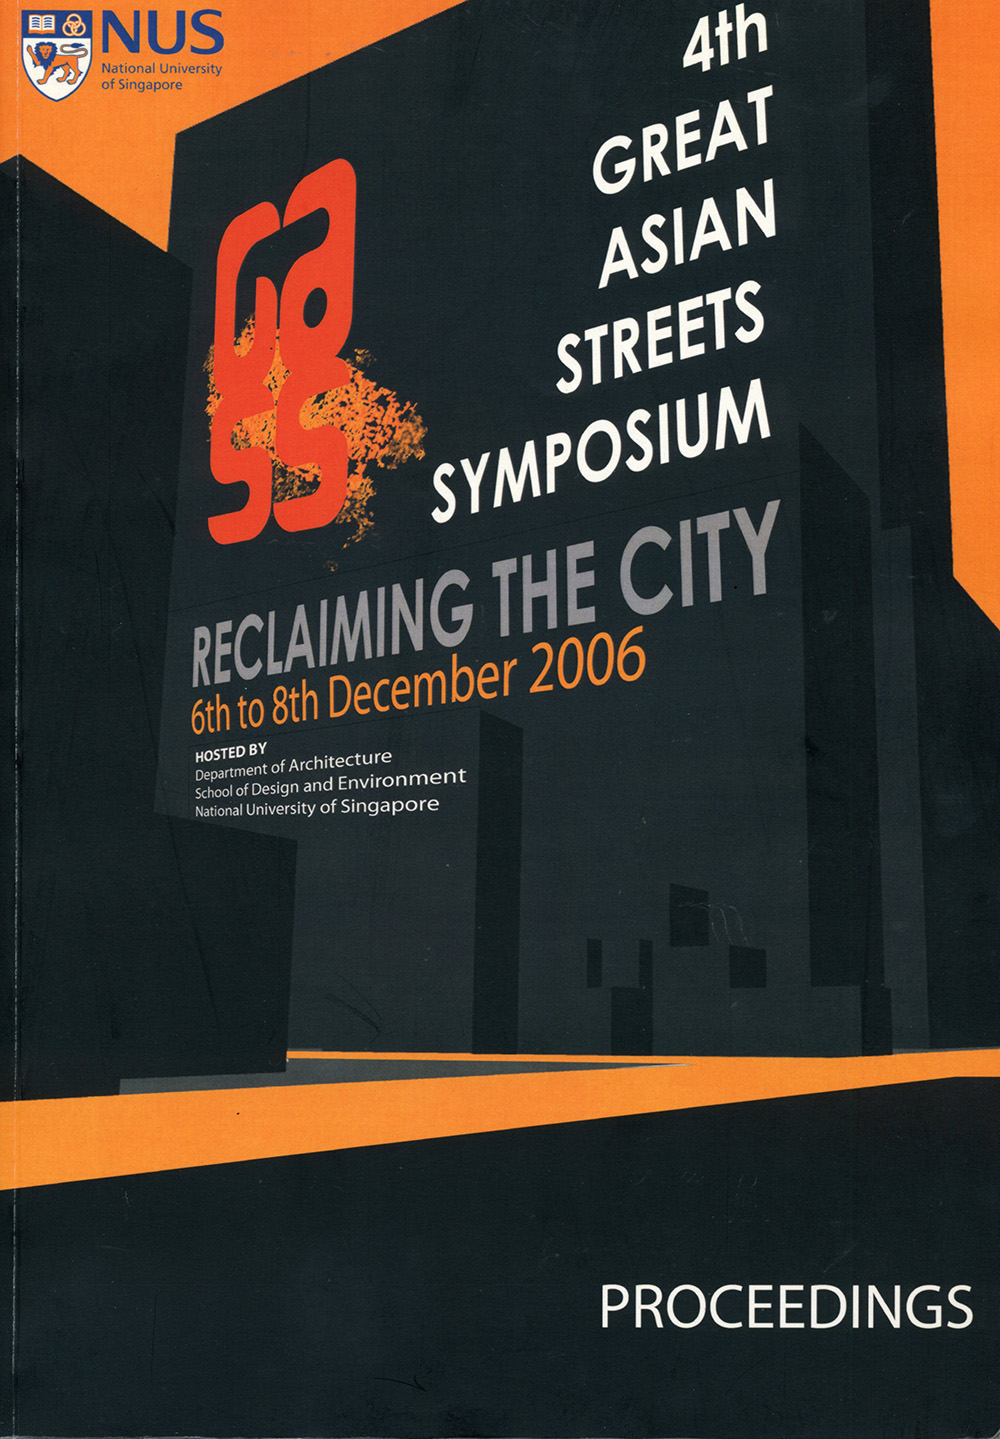 4th Great Asian Streets Symposium: Reclaiming the City